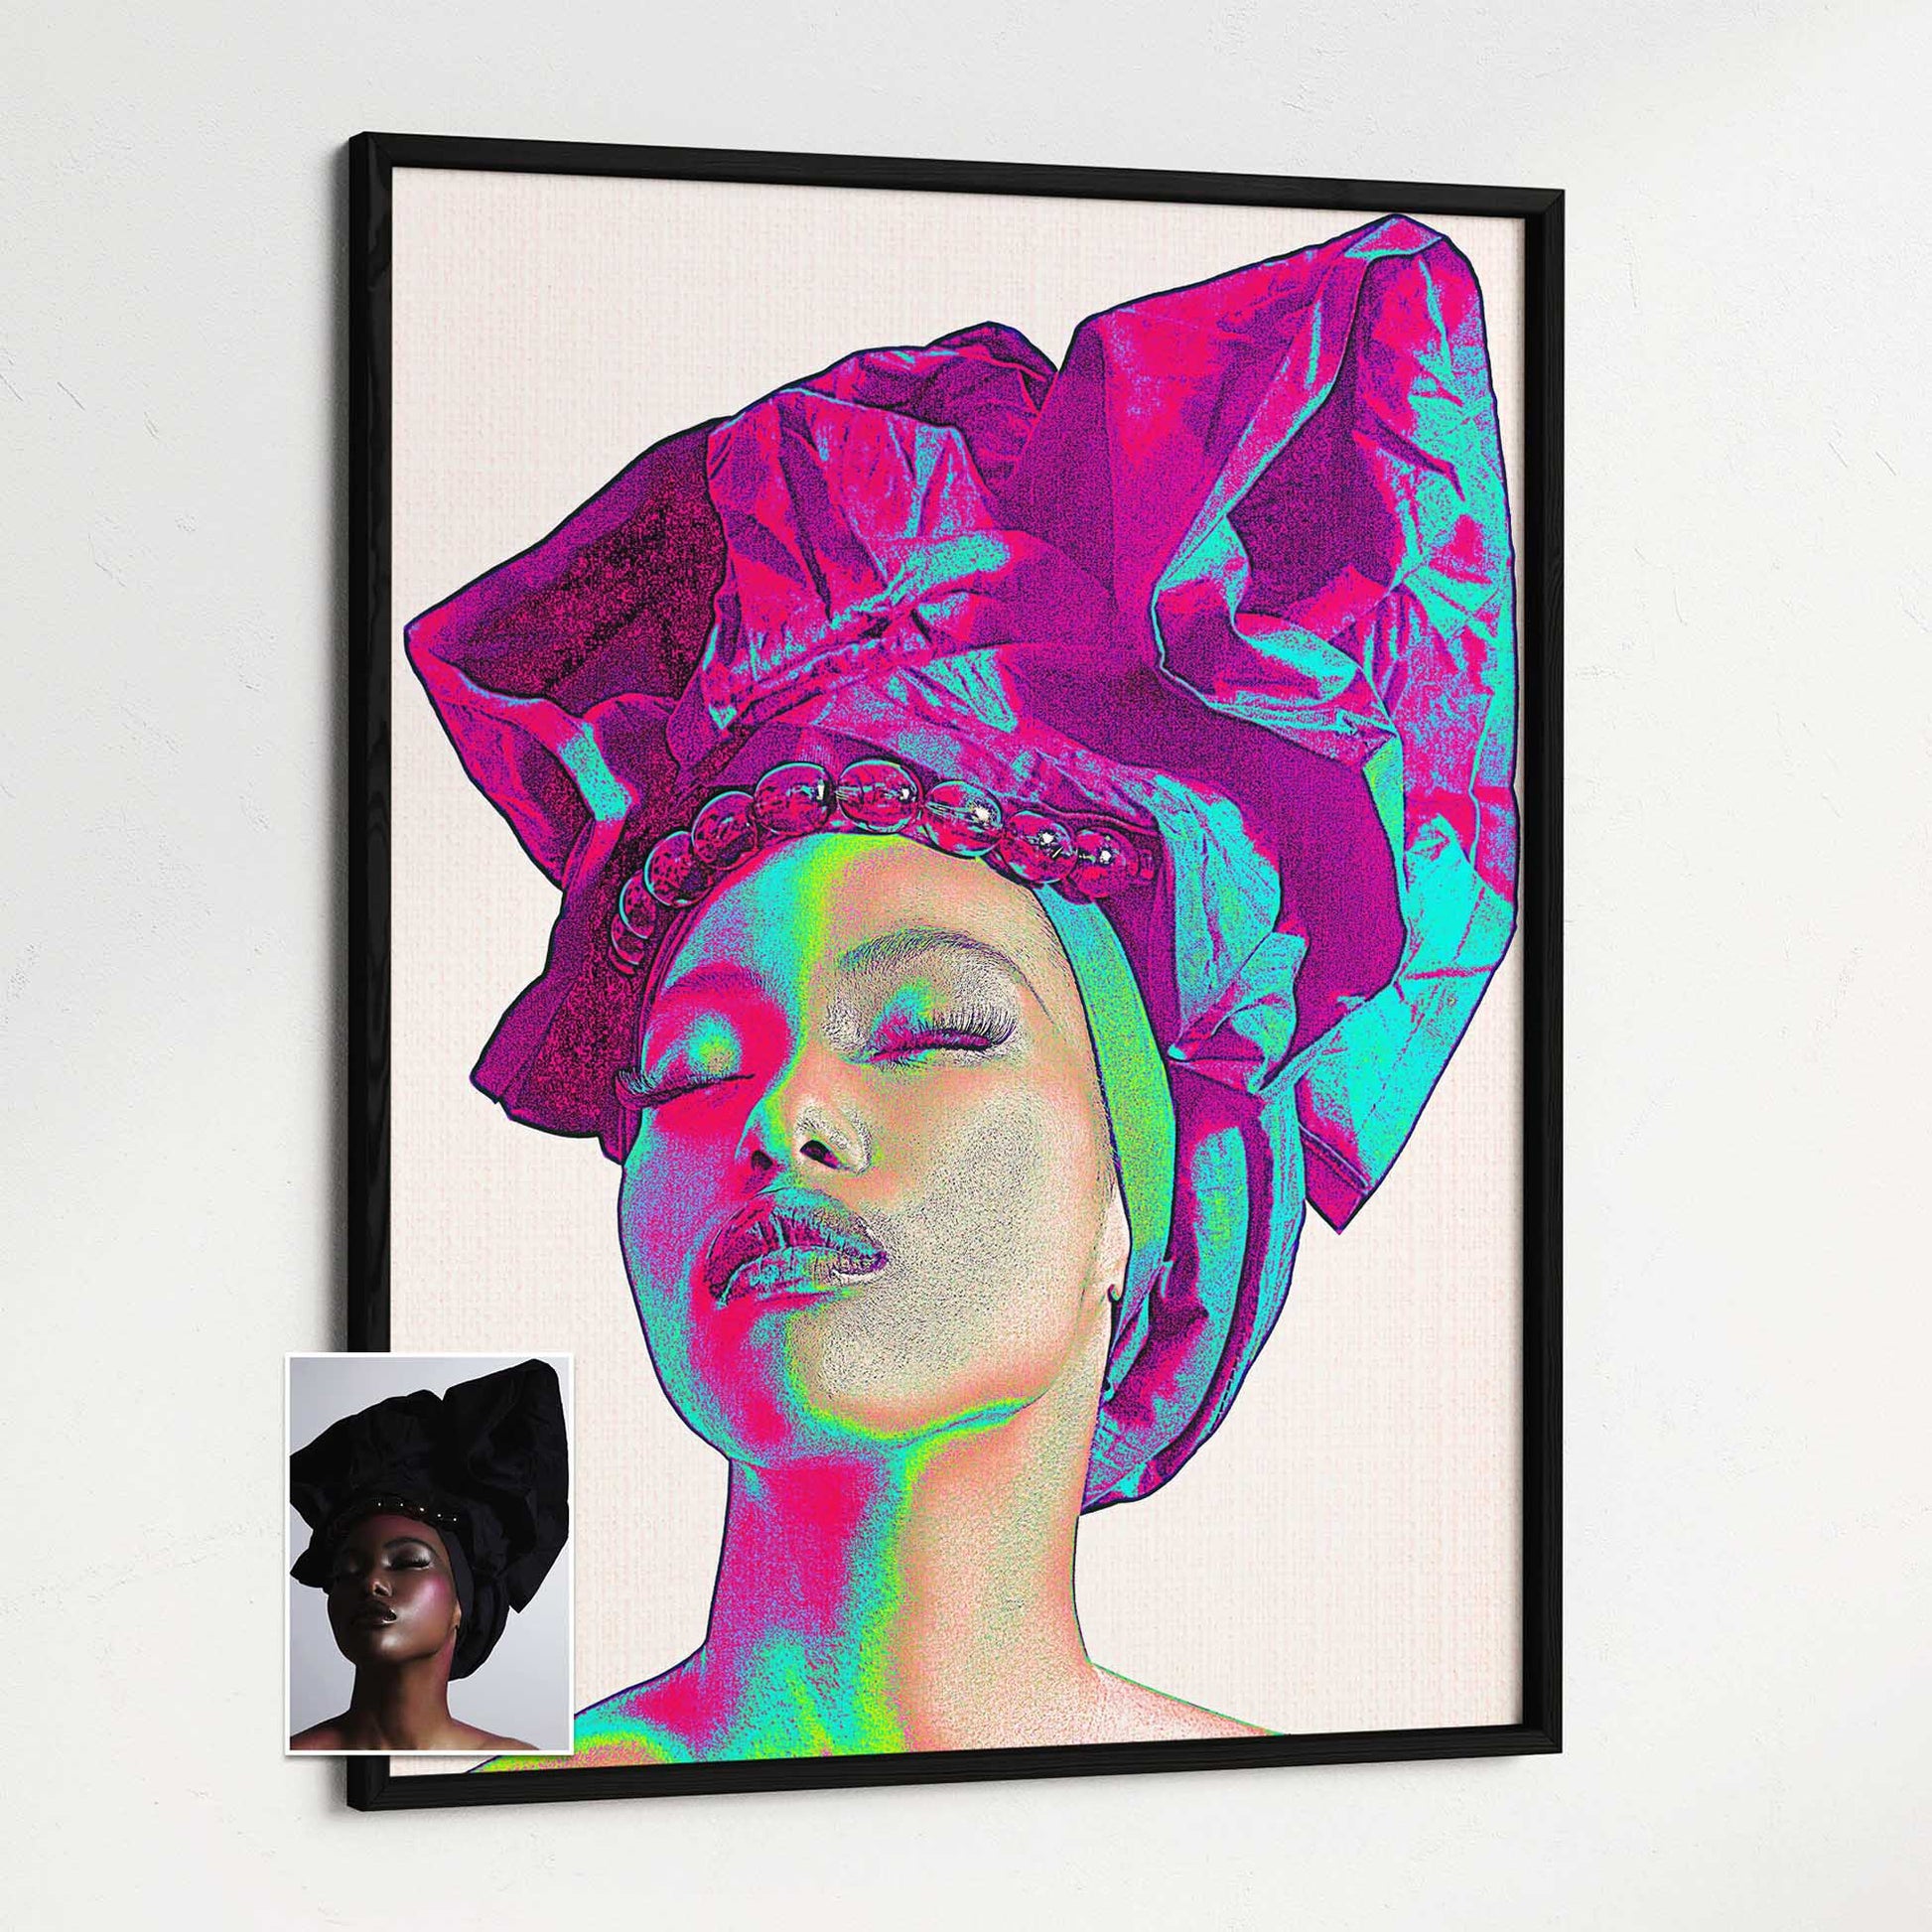 Fun and Vibrant Design: Add a pop of creativity to your home decor with this personalised pencil drawing framed print. Its sharp lines and vibrant colors create a positive and fun atmosphere. Whether displayed in the living room or bedroom